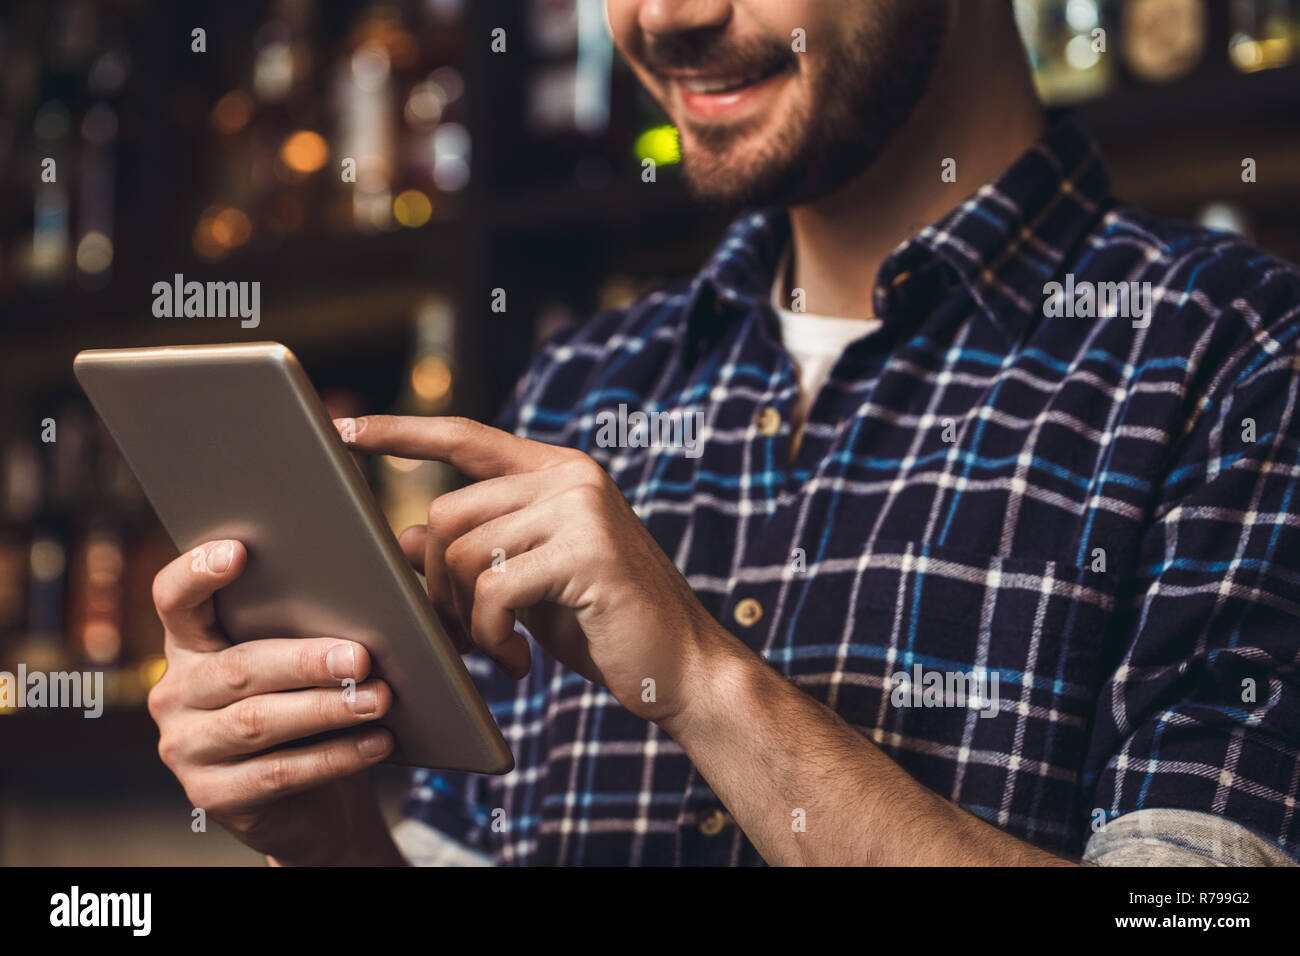 Young bartender standing at bar browsing digital tablet happy close-up Stock Photo